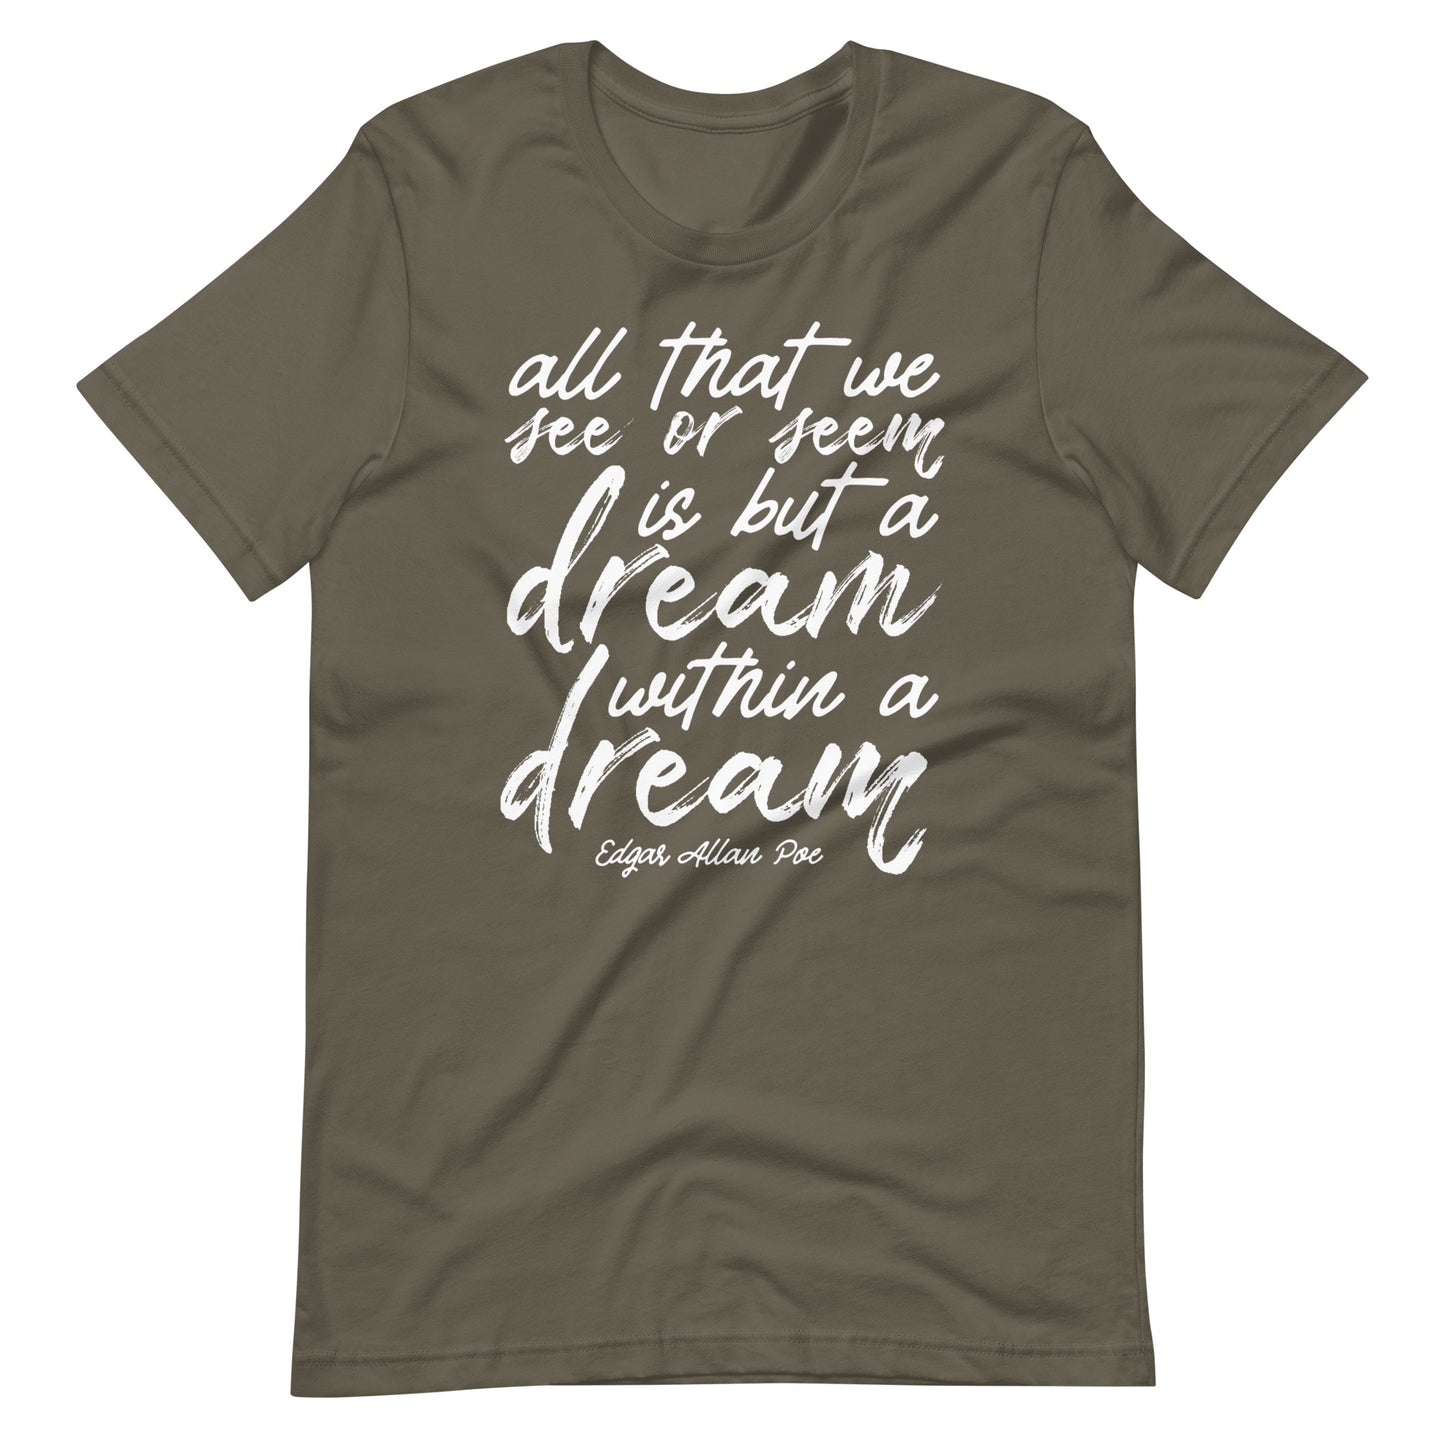 Dream Within a Dream Edgar Allan Poe Quote - Men's t-shirt - Army Front